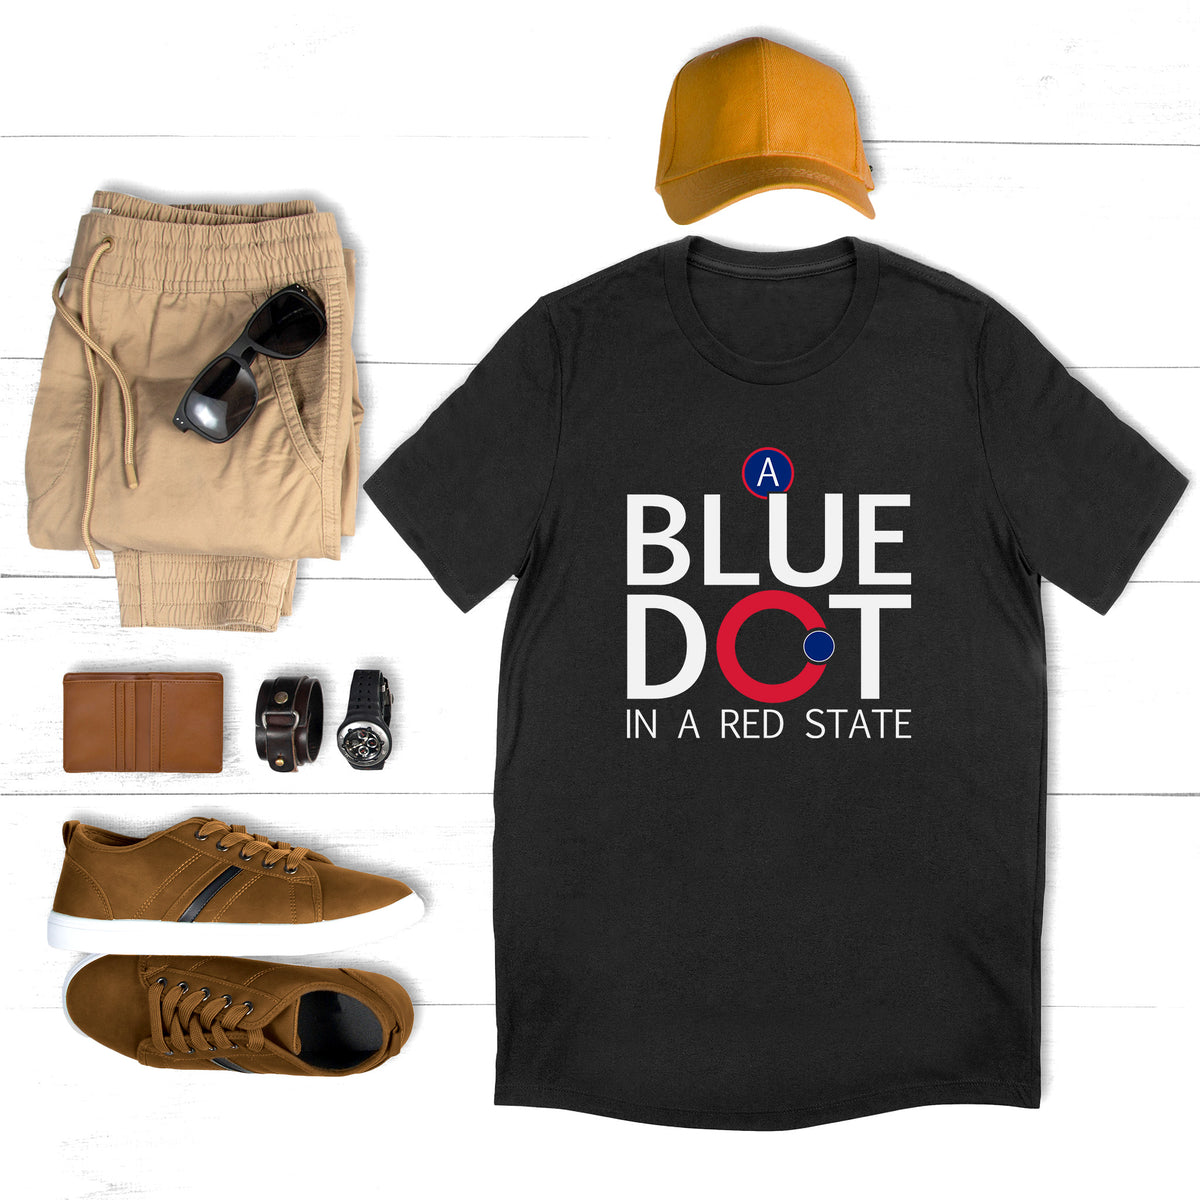 Black unisex t-shirt with text that reads “A Blue Dot in a Red State.”